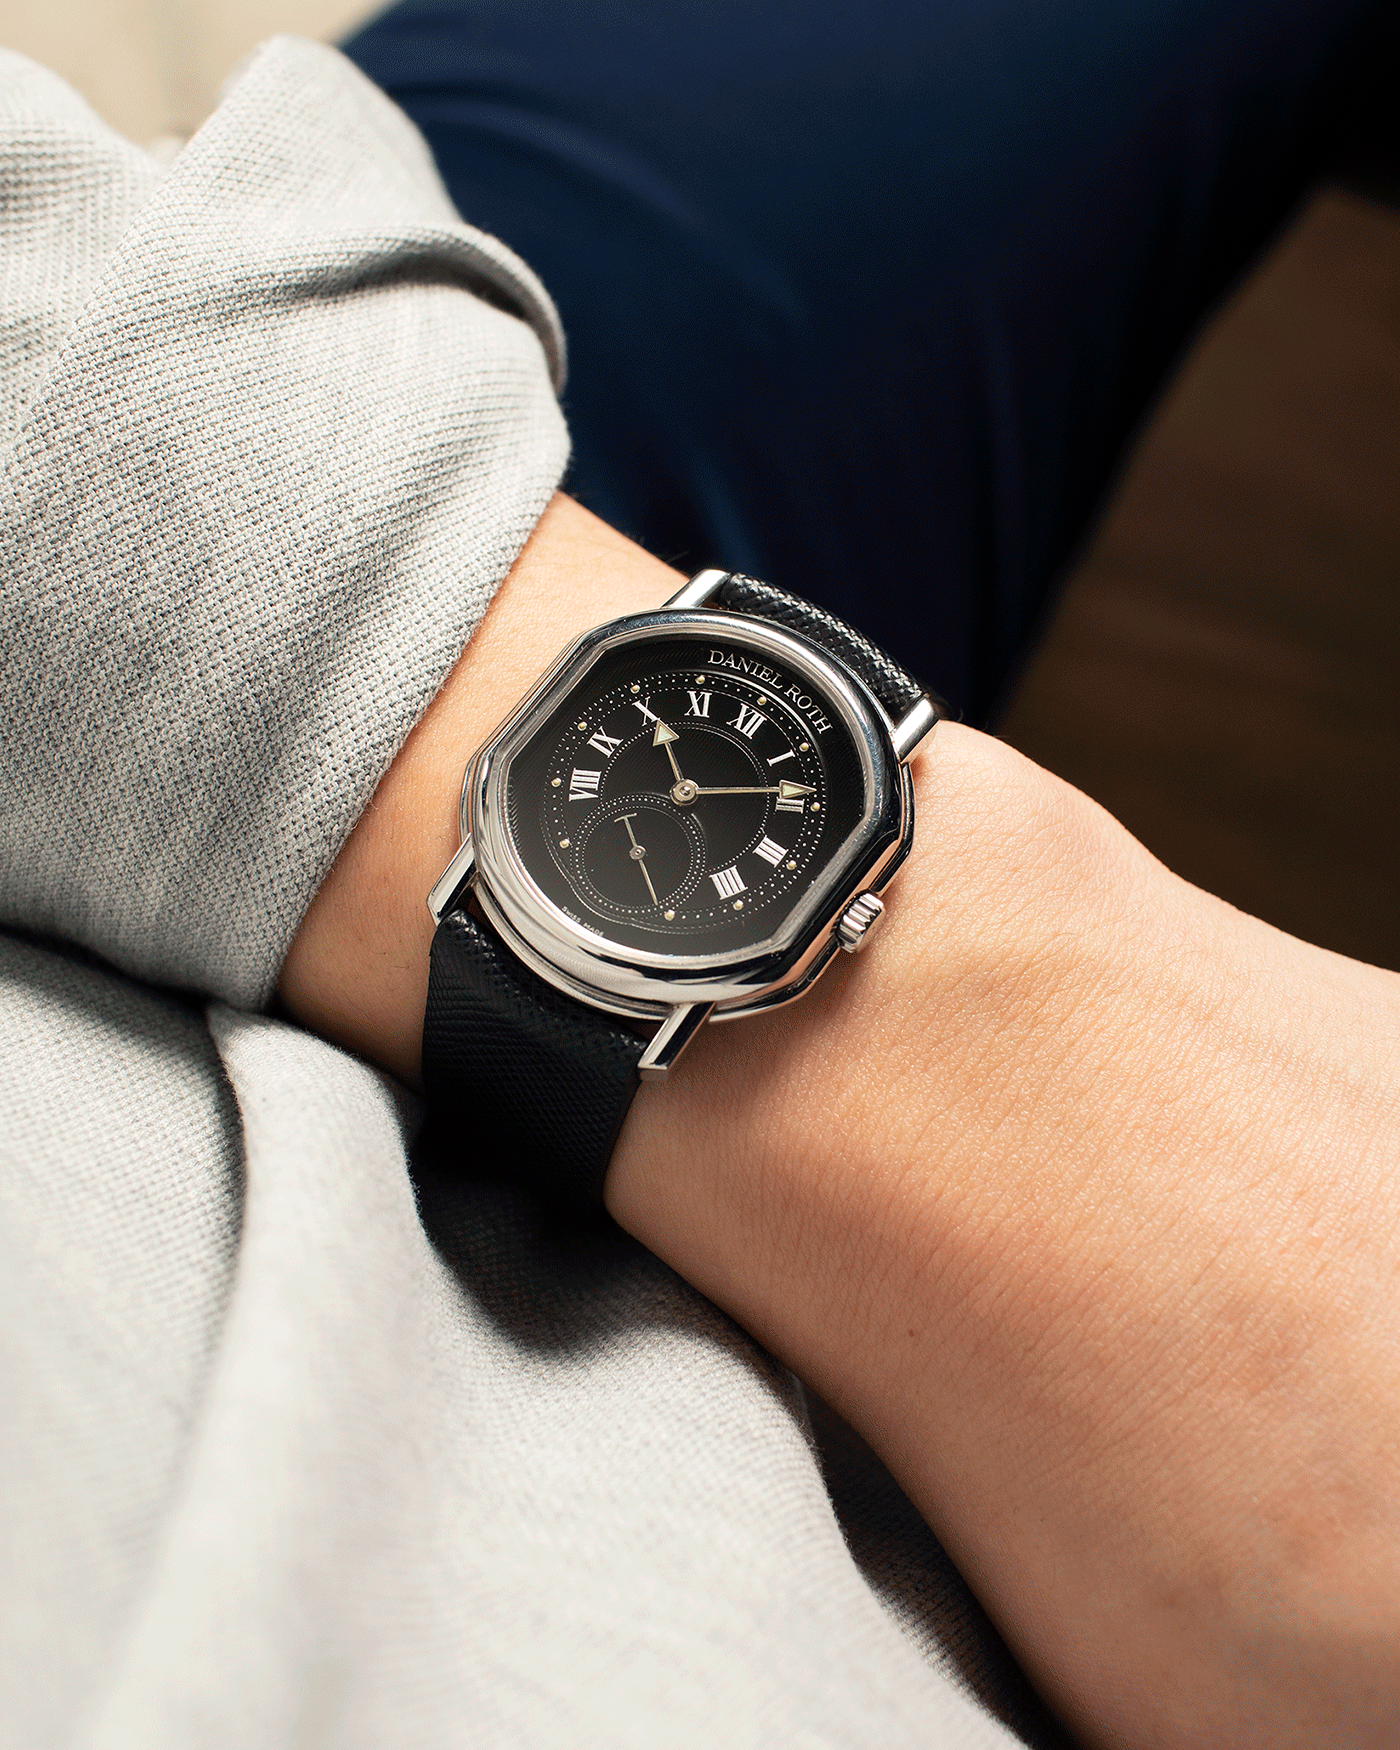 Brand: Daniel Roth Year: 2002 Model: Small Seconds Material: Stainless Steel Case Diameter: 35mmX38mm Bracelet/Strap: JPM X S.SONG Black Saffiano and Stainless Steel Daniel Roth Tang Buckle